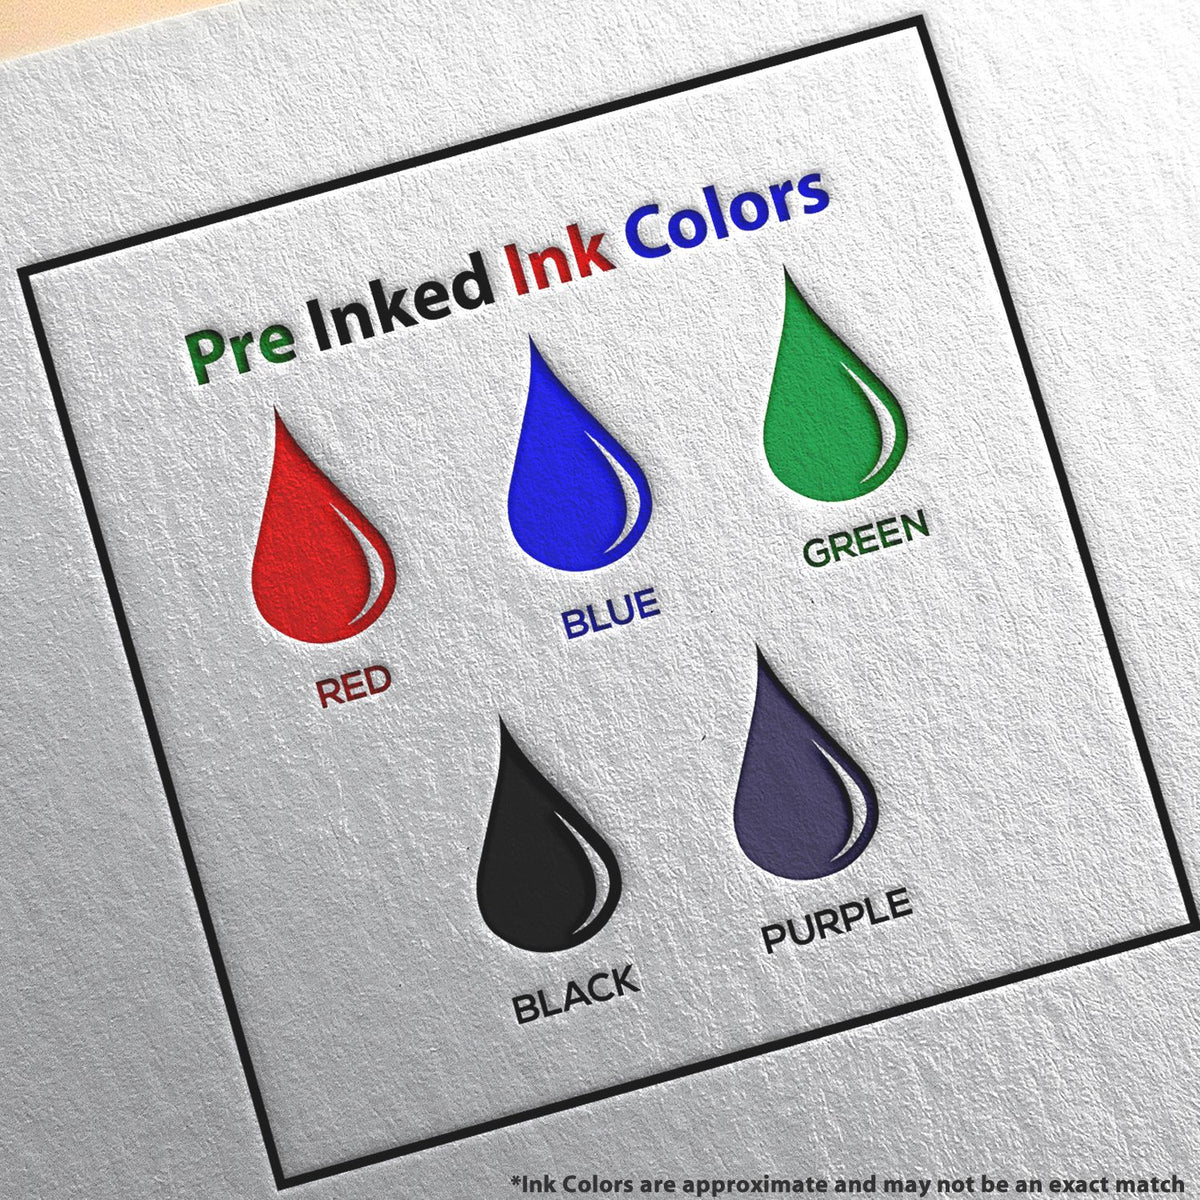 A picture showing the different ink colors or hues available for the MaxLight Premium Pre-Inked Louisiana State Seal Notarial Stamp product.